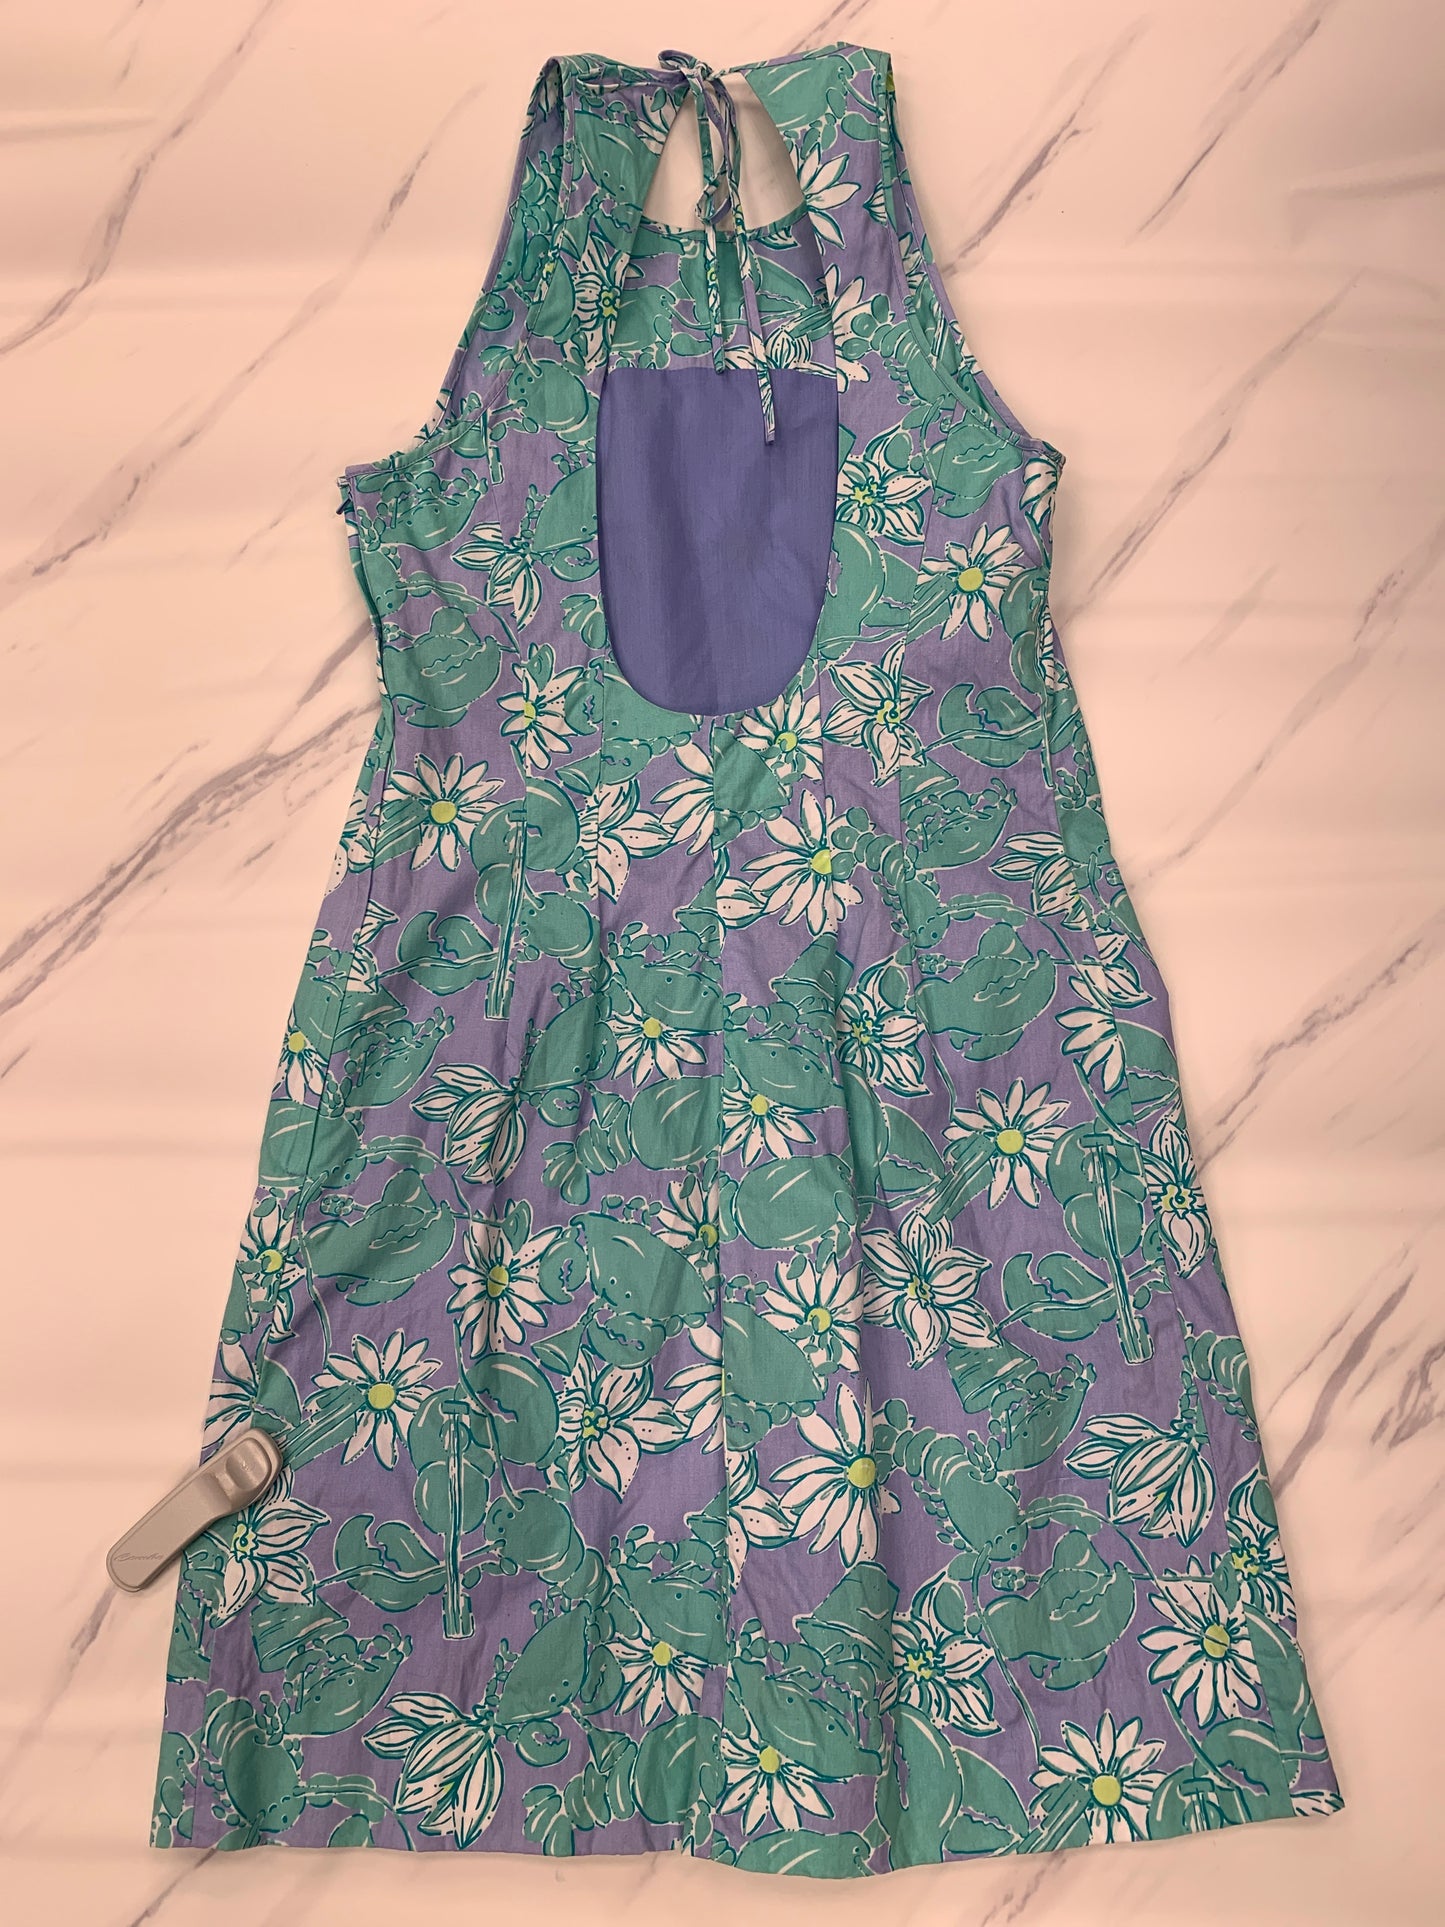 Dress Designer By Lilly Pulitzer  Size: 10